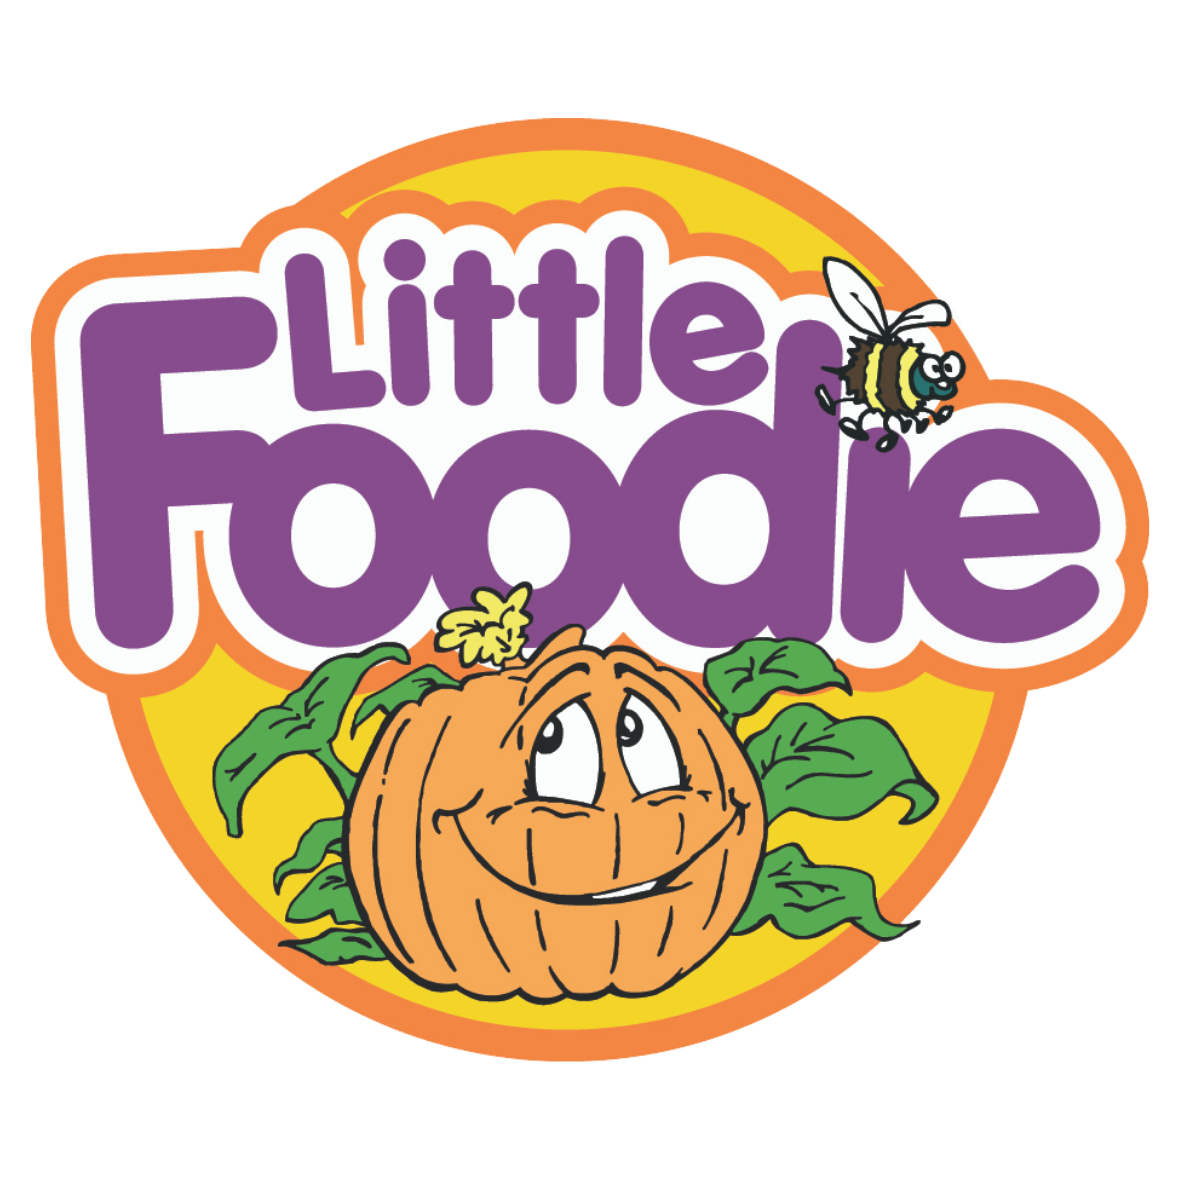 Logo of the Little Foodies Club